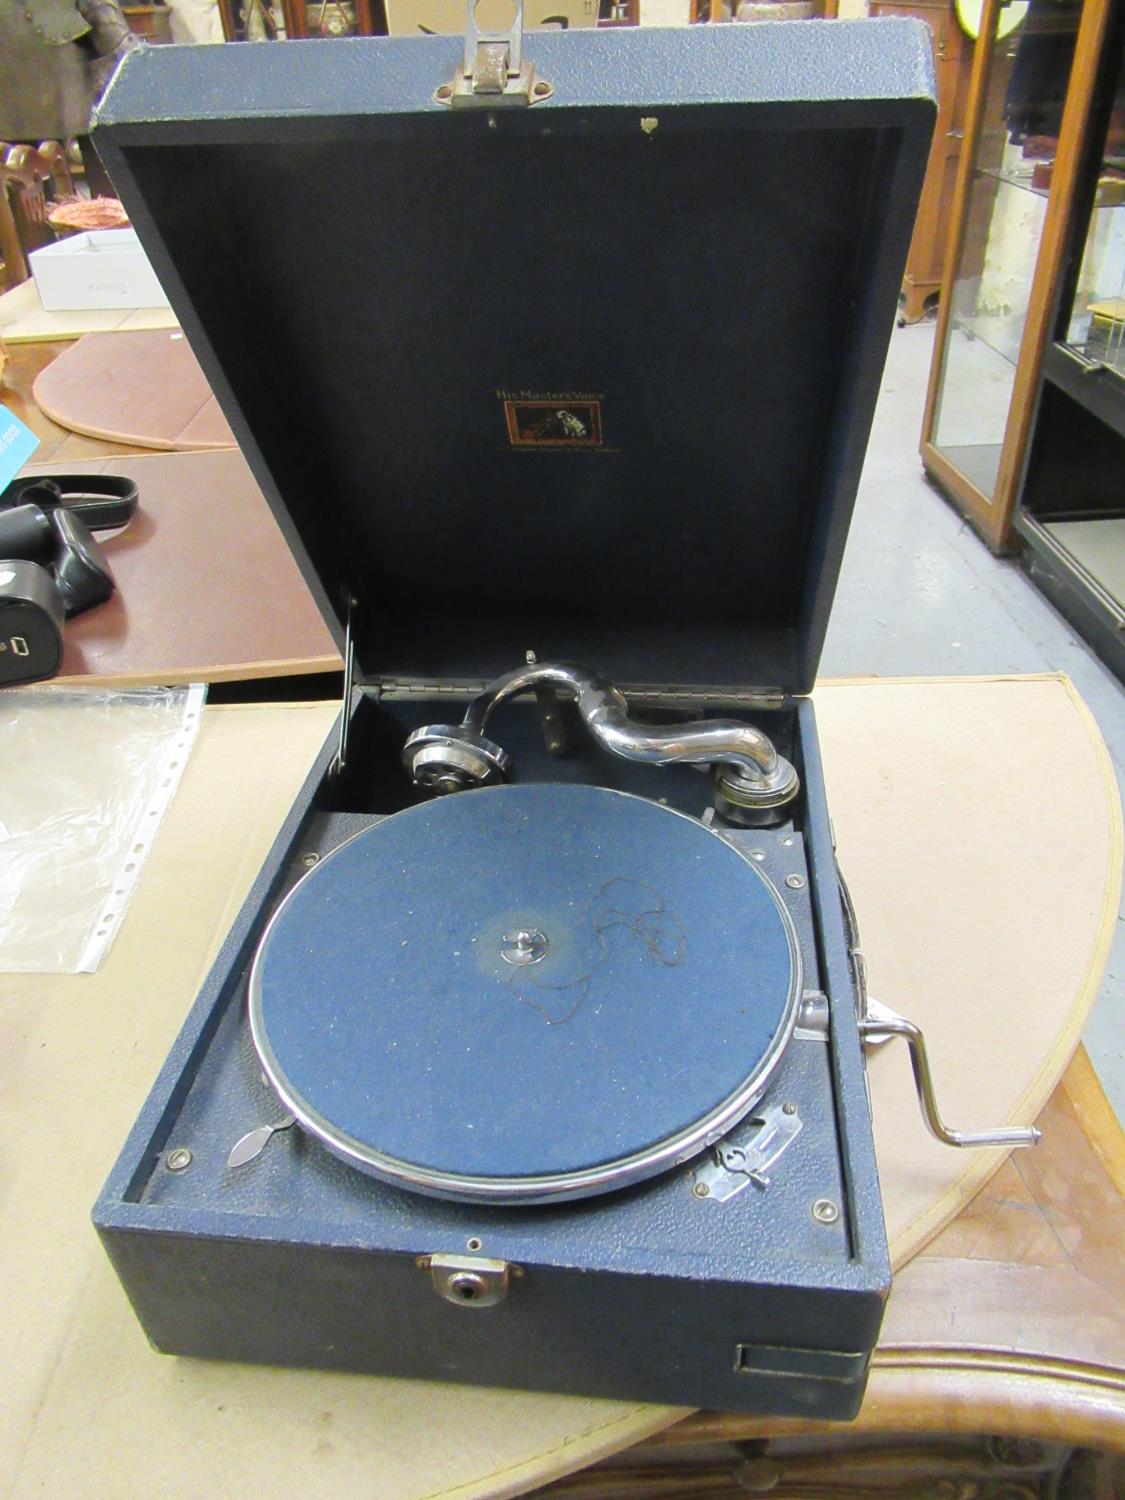 HMV table model wind-up portable gramophone in a blue rexine covered case